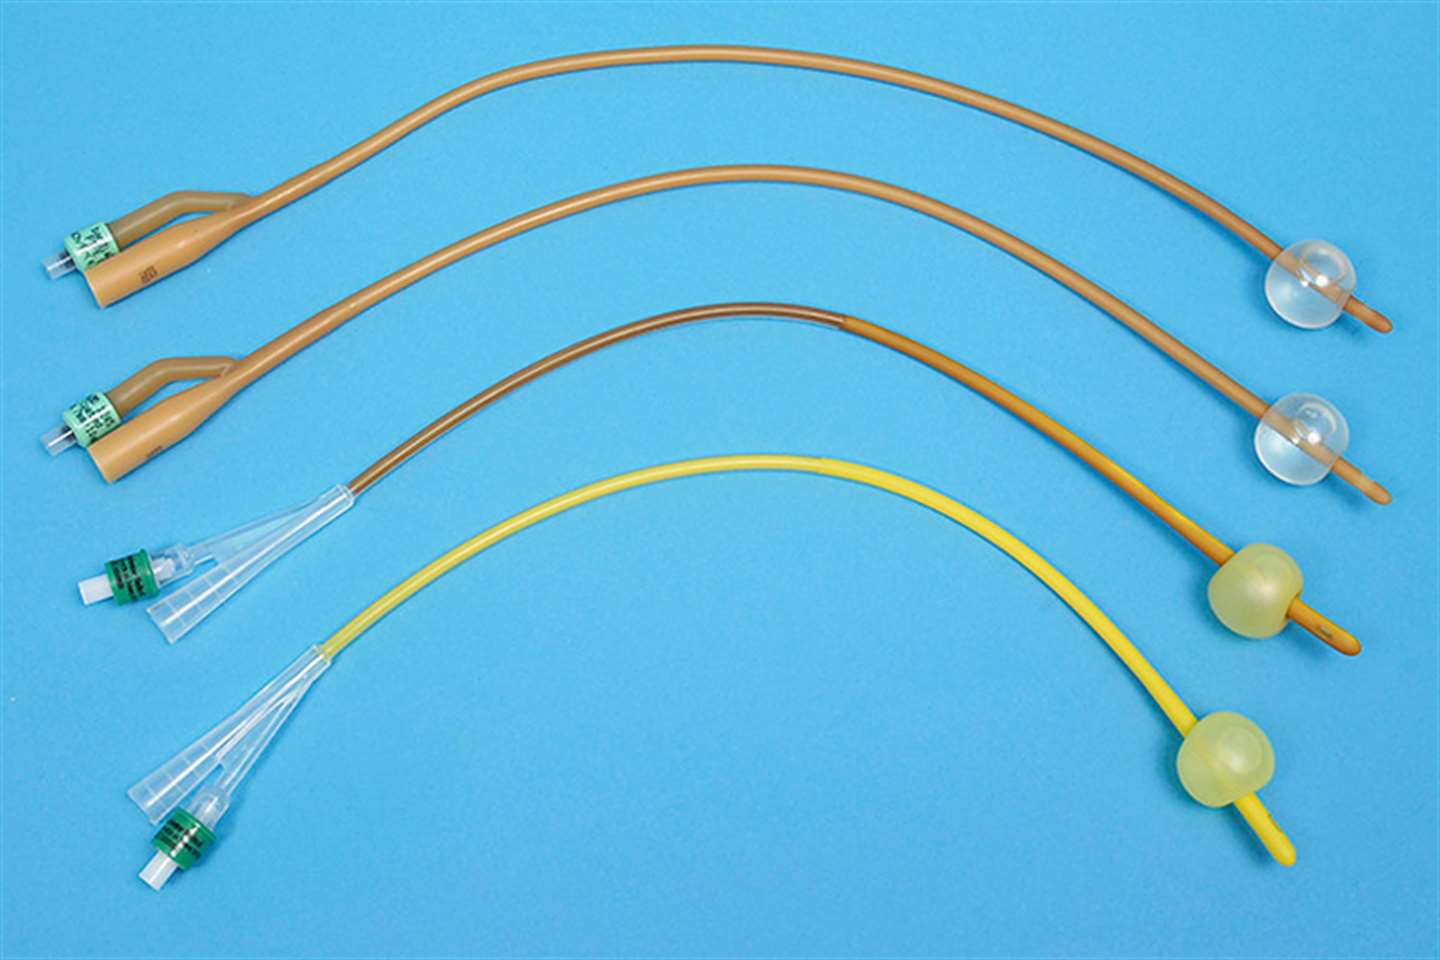 Selection of Foley indwelling catheters